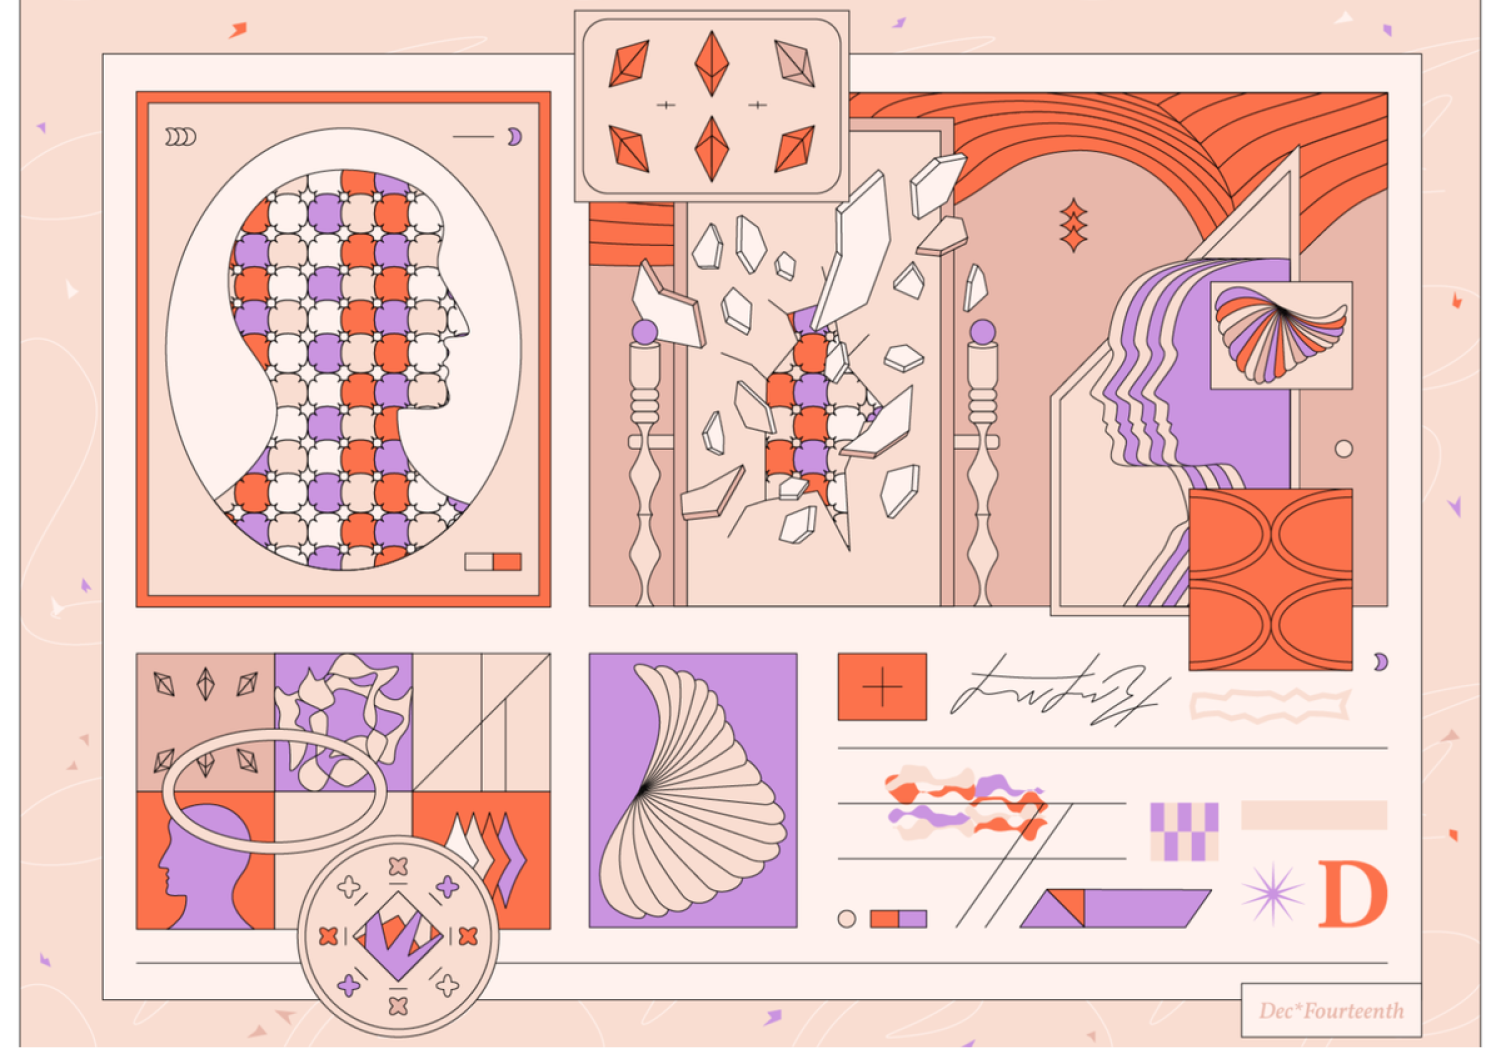 An illustration from Dribbble portraying abstract psychology